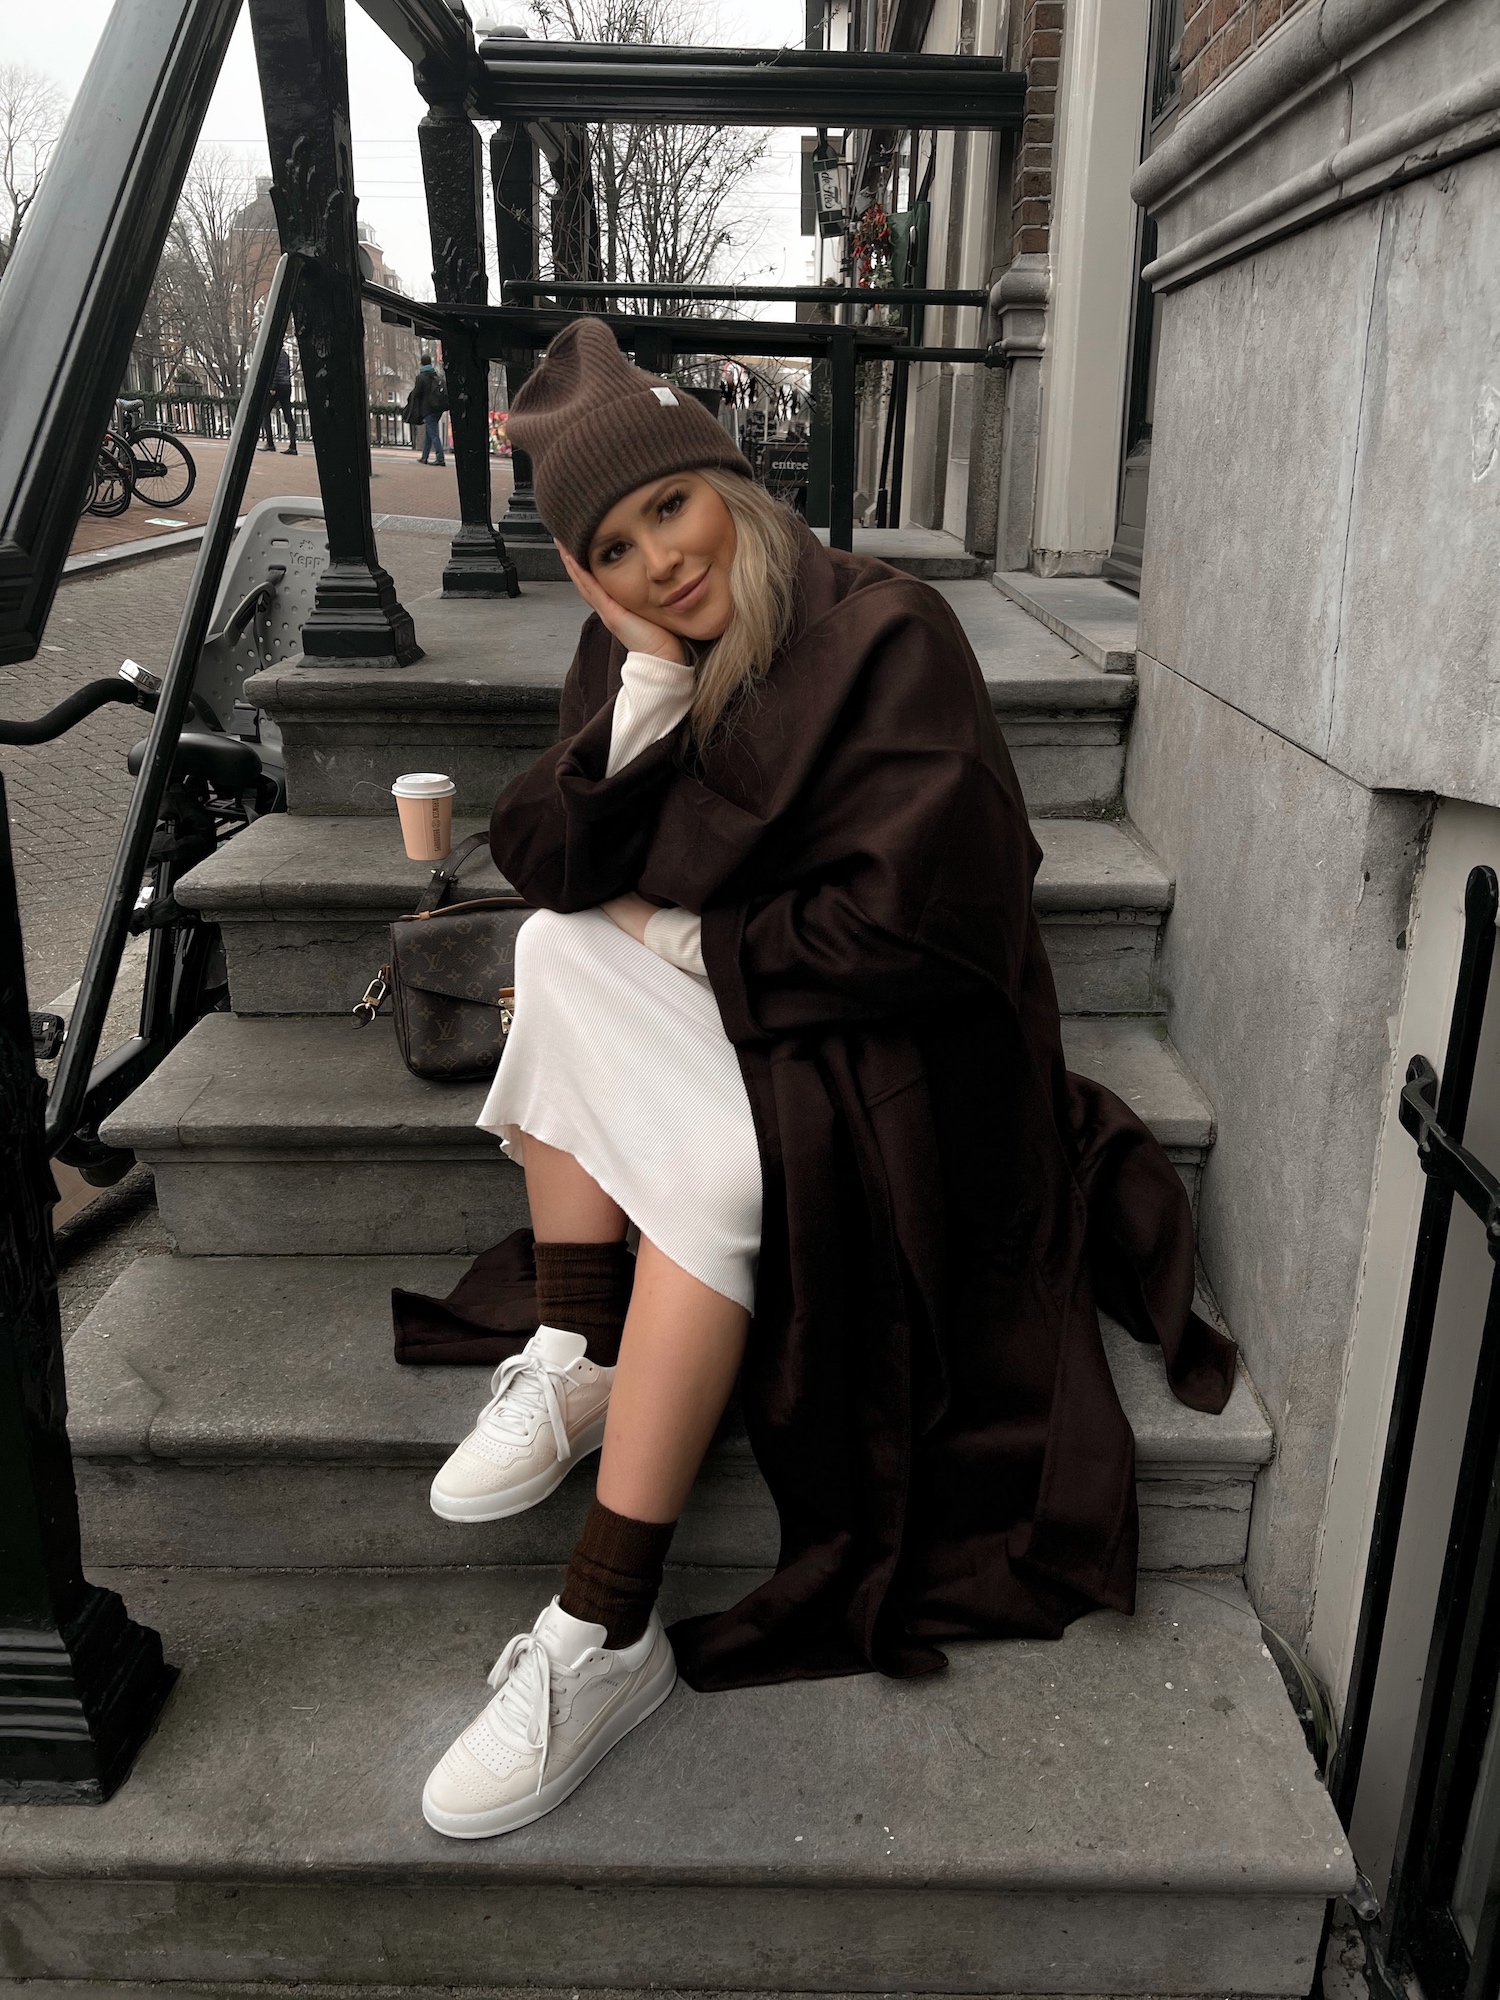 @verena_ahmann is wearing a outfit in natural tones. She combined her CPH461 leather mix cream with a beige silk dress, a dark brown oversized trenchcoat, dark brown socks and a beanie. She is sitting on some stairs in Amsterdam.